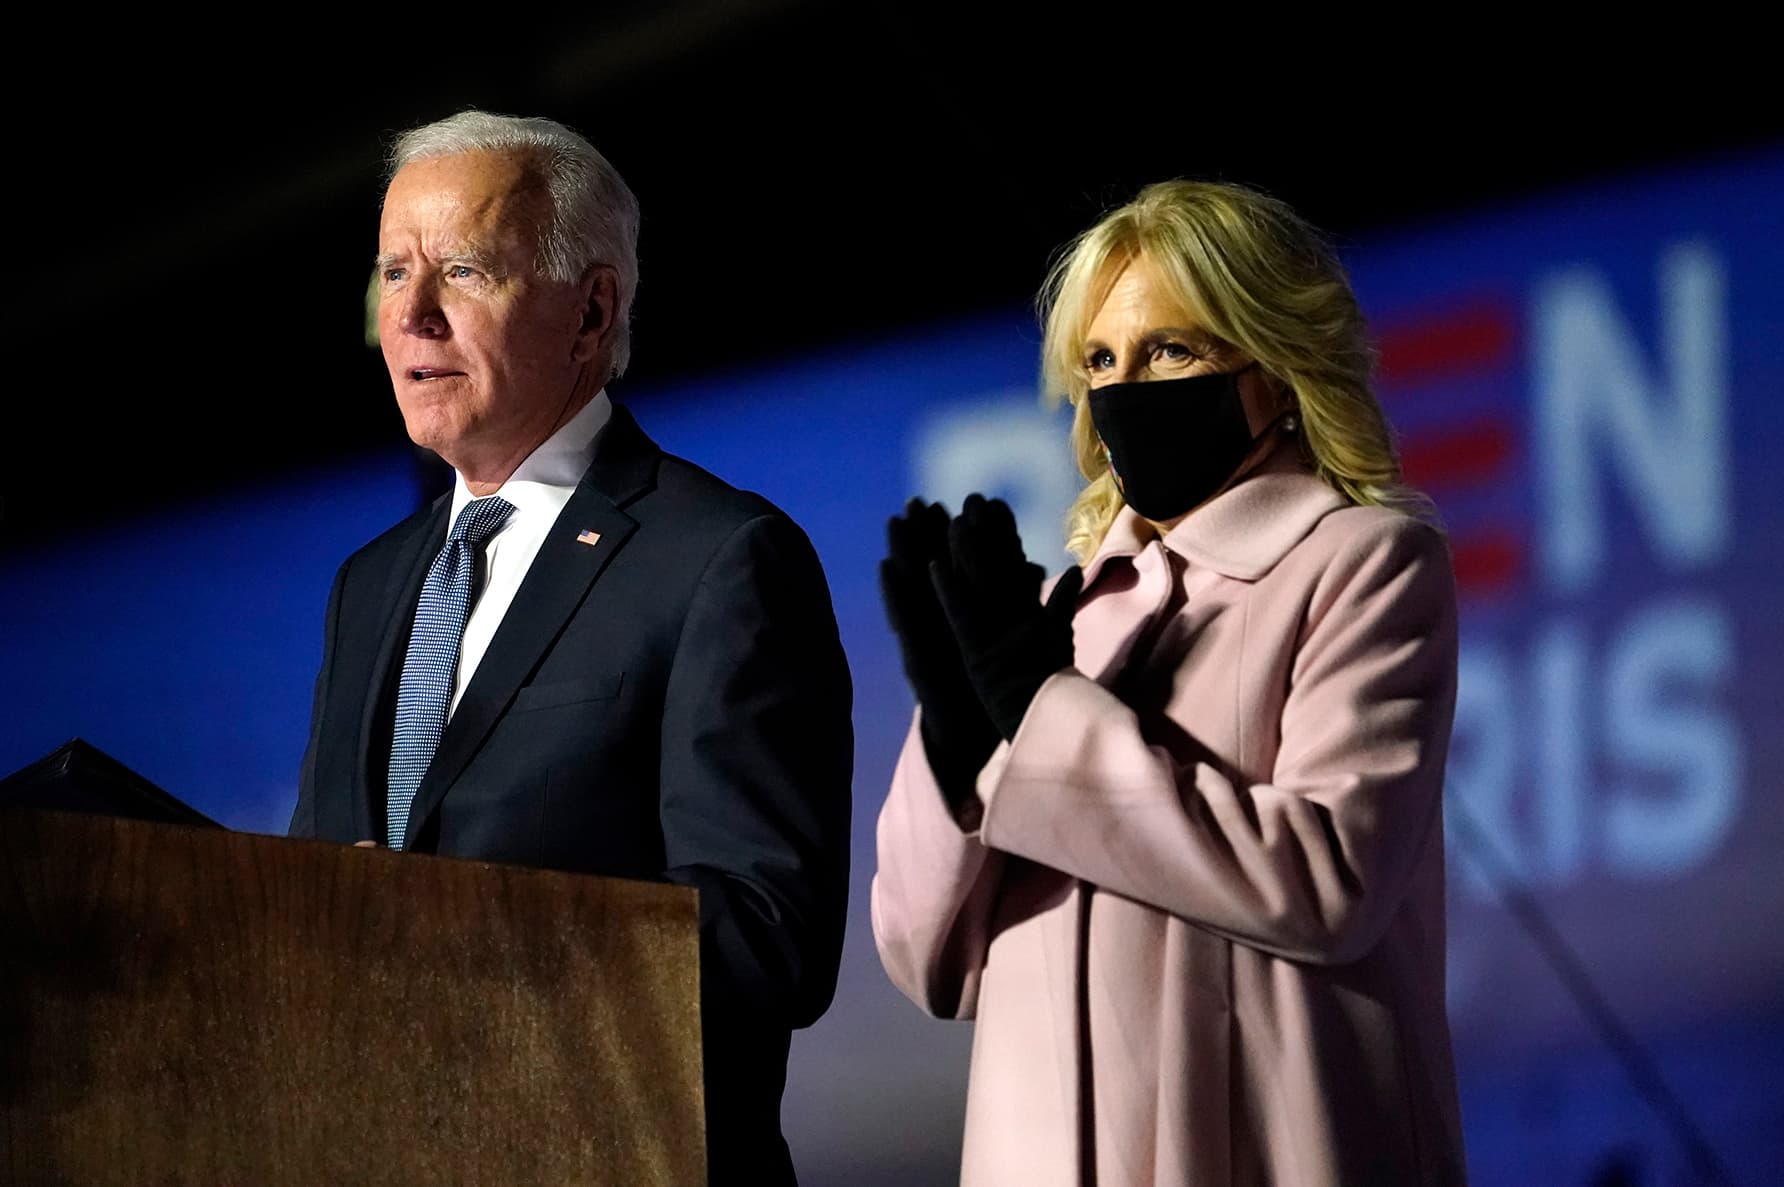 election-2020-live-results-biden-remains-confident-despite-trumps-projected-wins-in-ohio-florida-and-texas